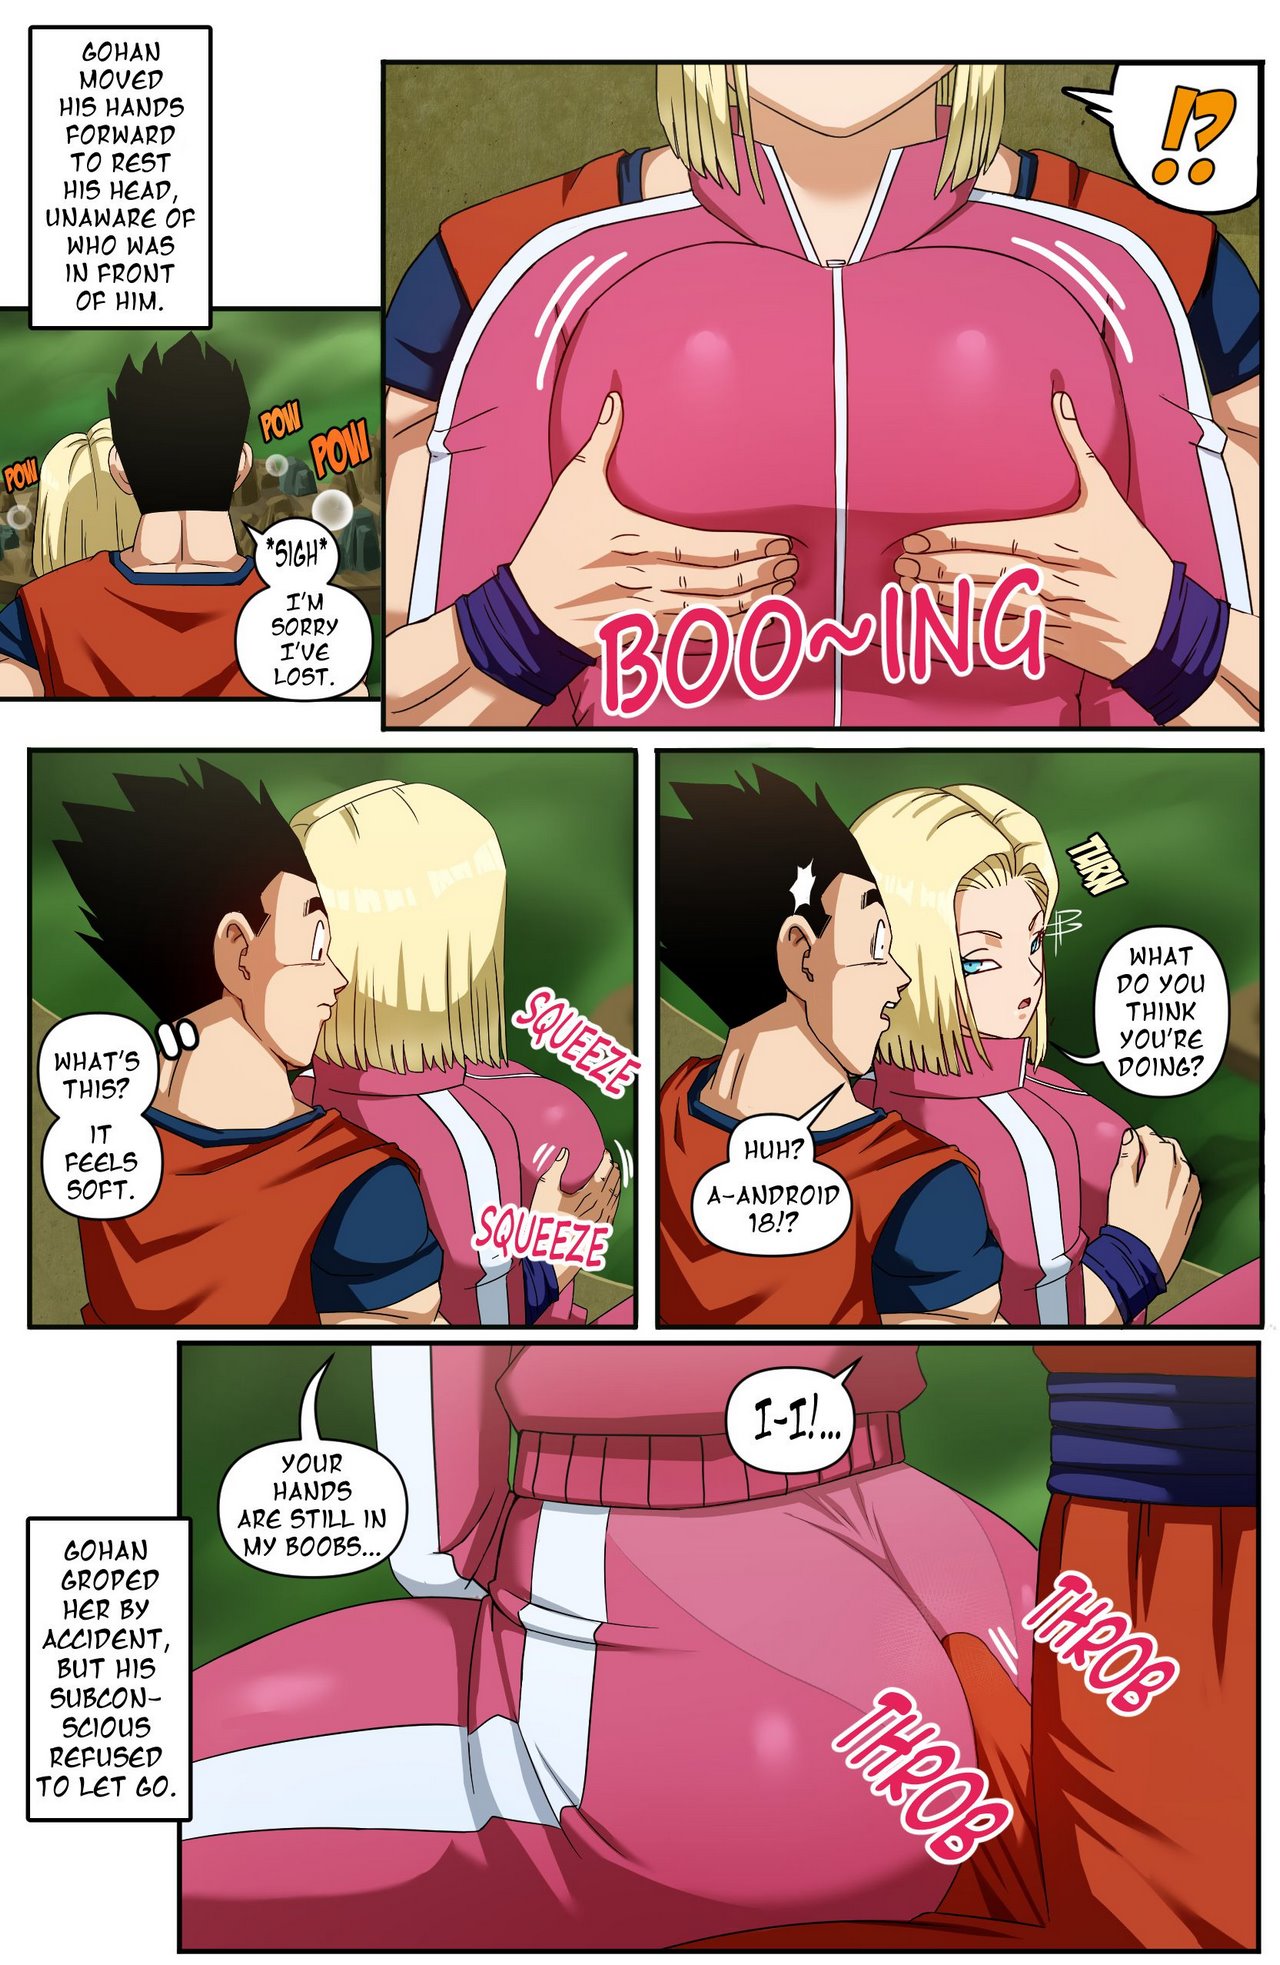 Android 18 pink pawg